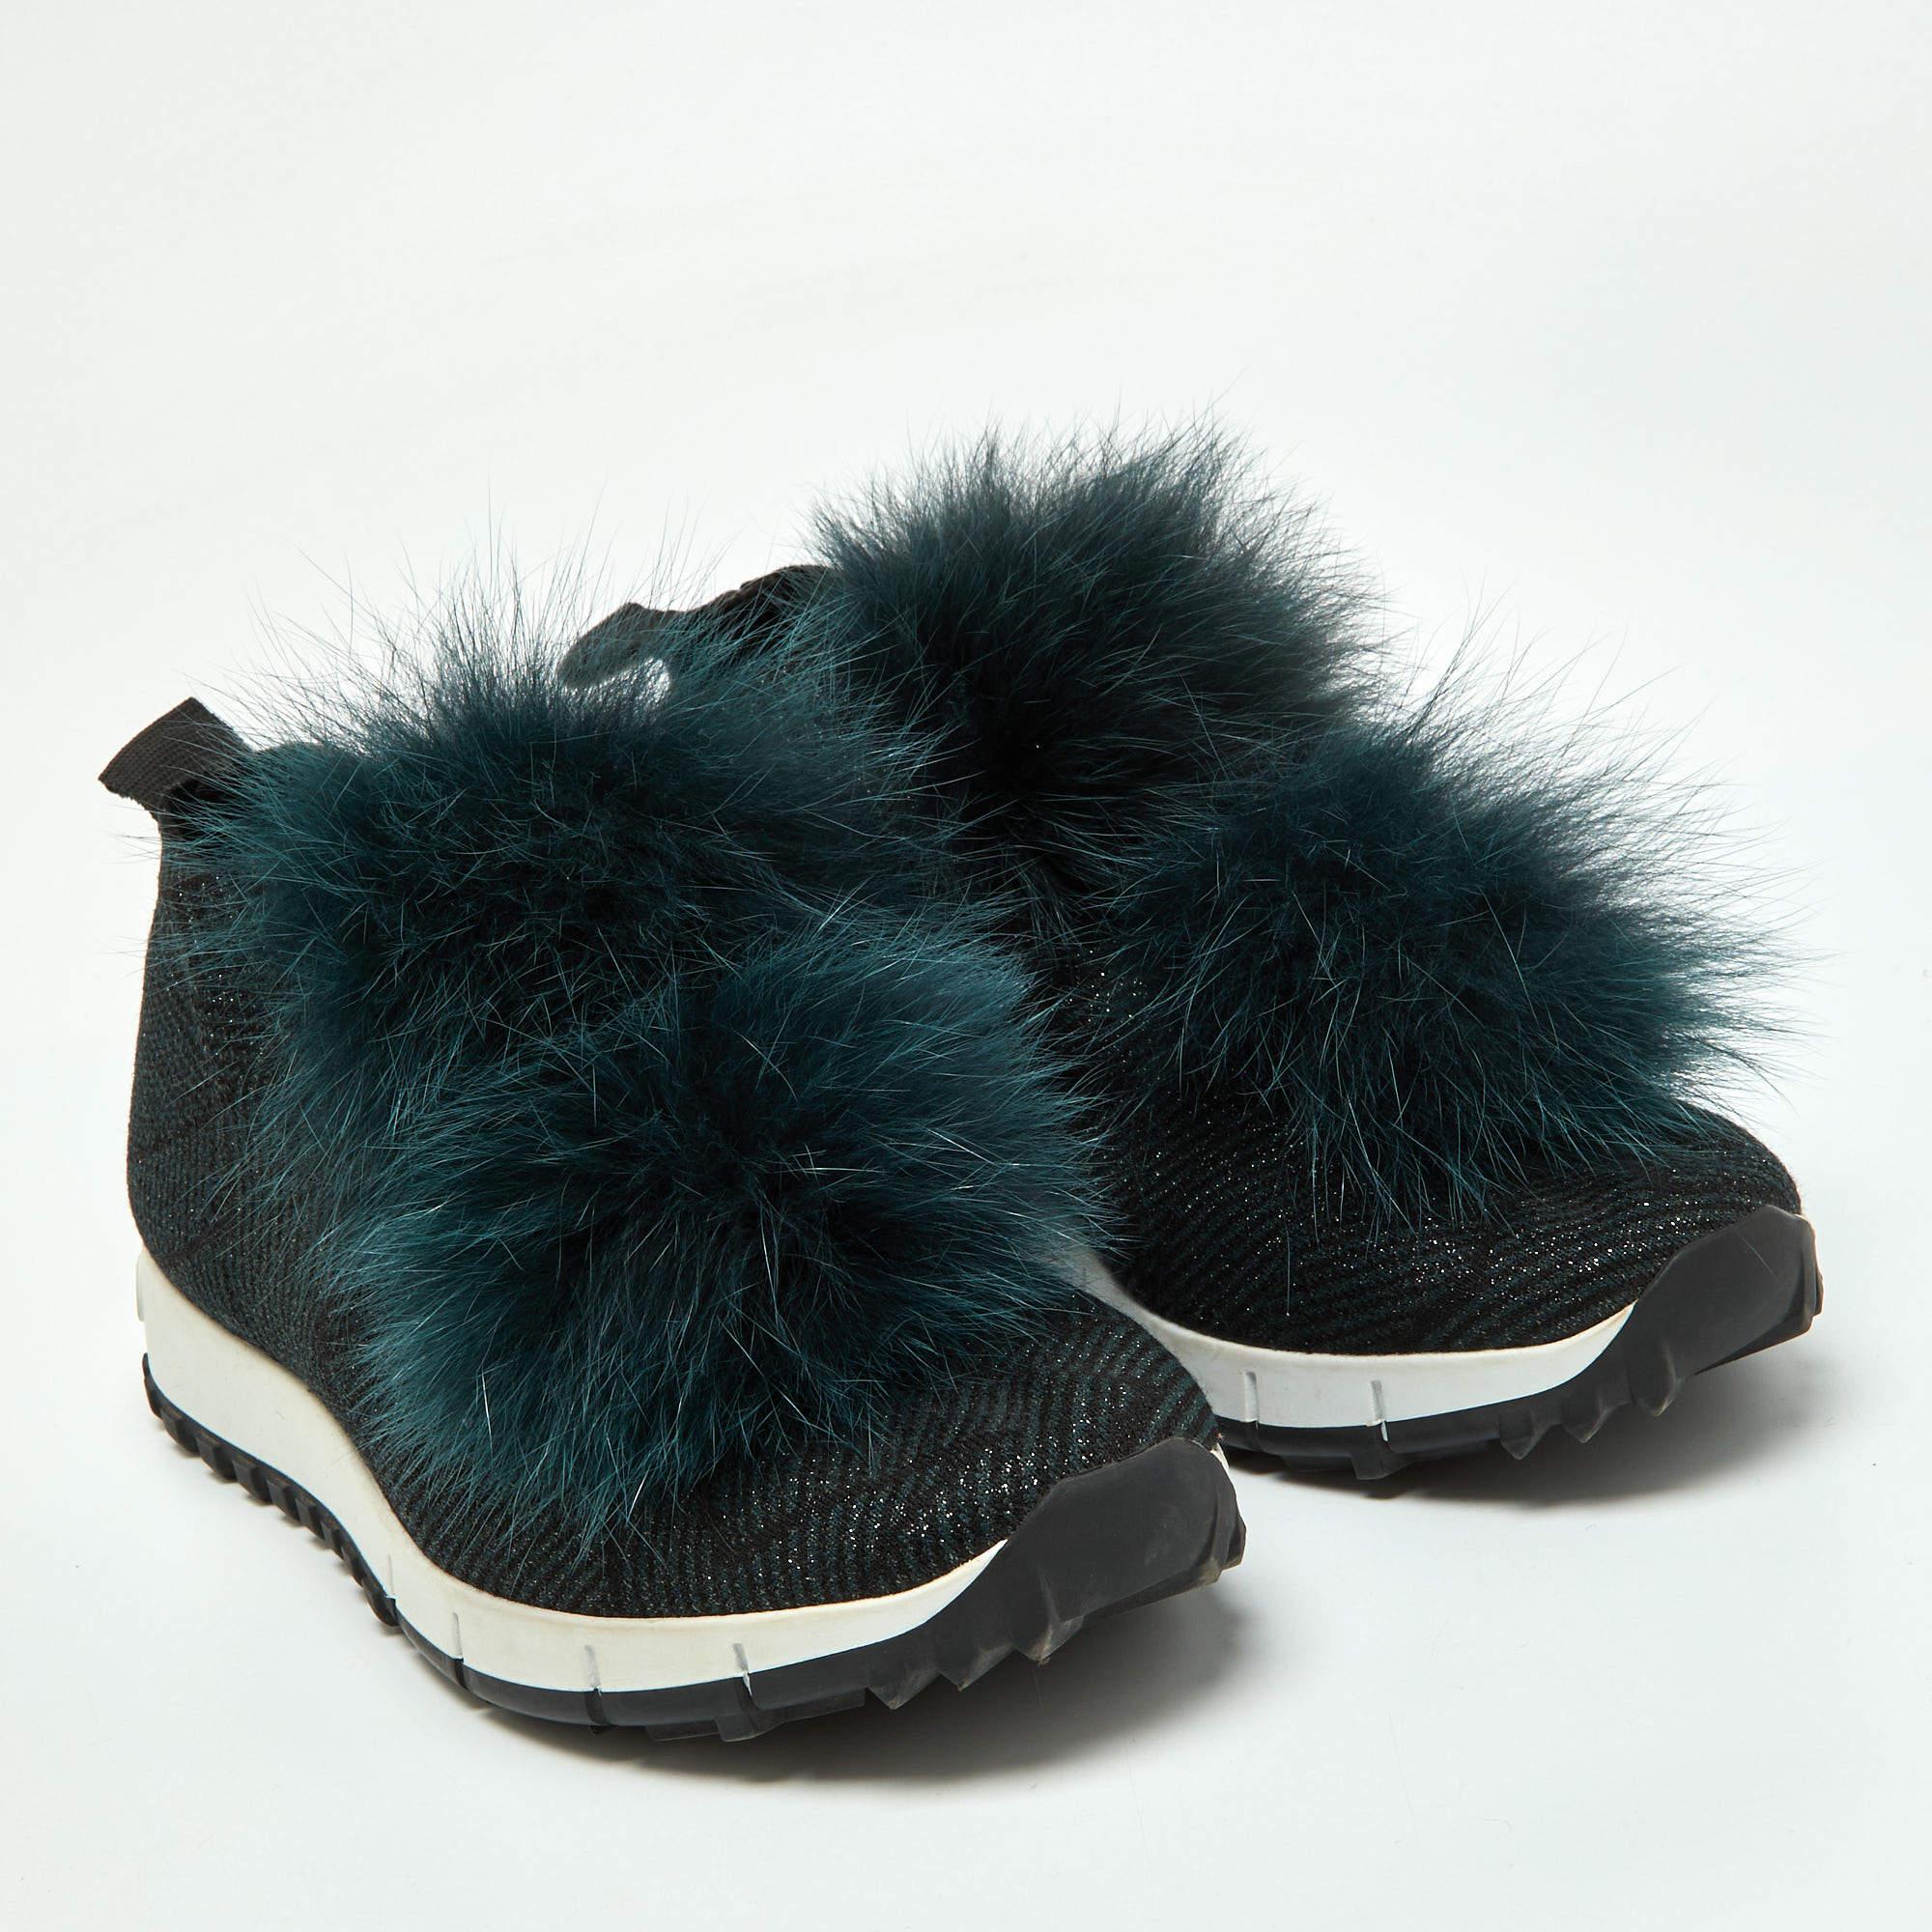 Jimmy Choo Deep Green Knit Fabric and Fur Pom Pom Norway Slip On Sneakers Size 3 In Good Condition For Sale In Dubai, Al Qouz 2